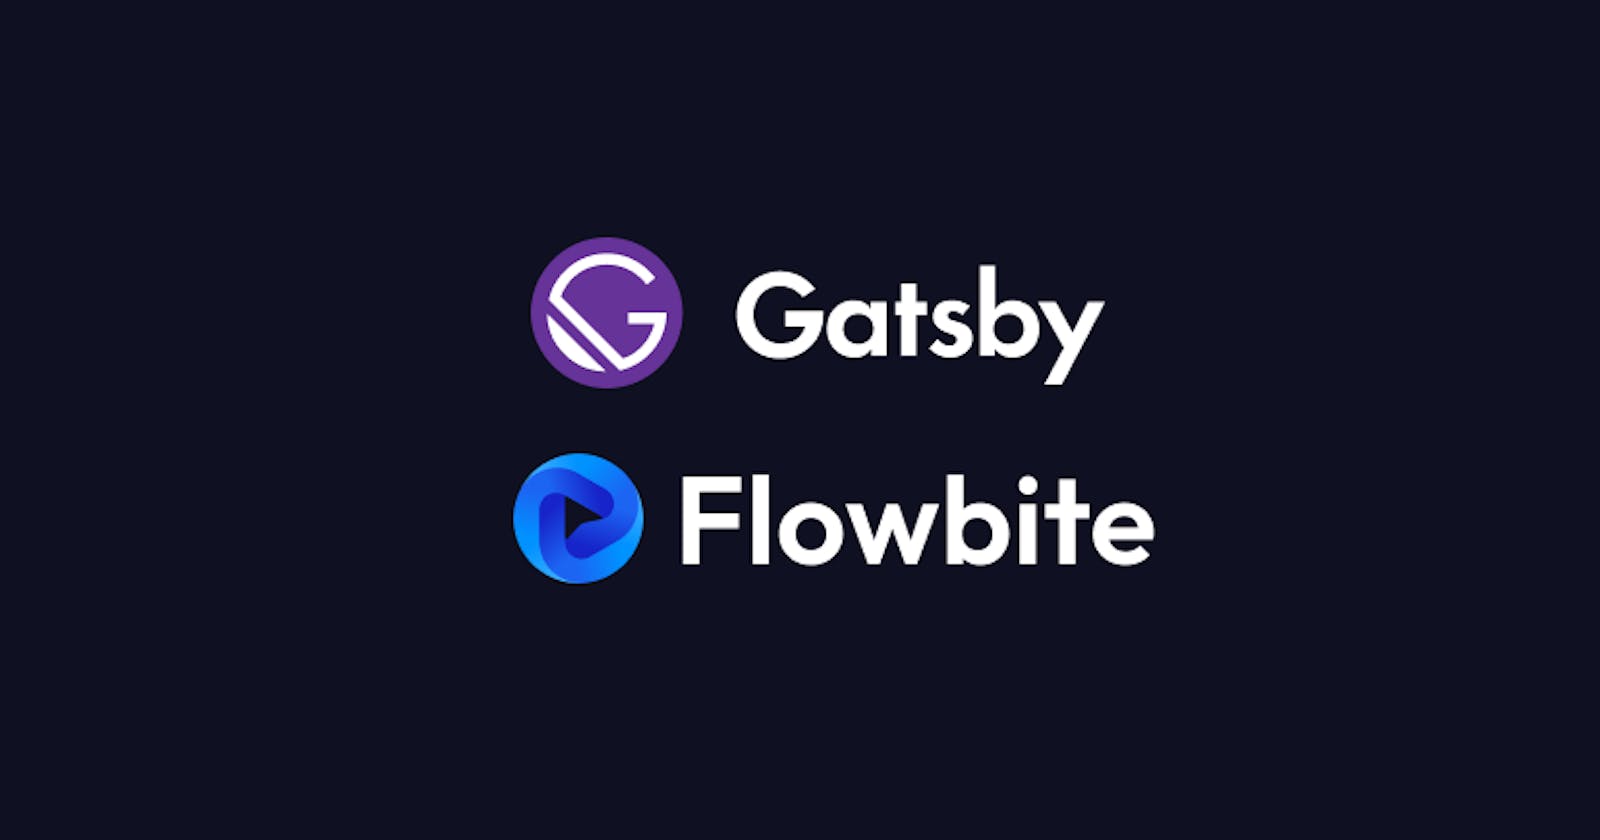 How to install Tailwind CSS with Gatsby and Flowbite